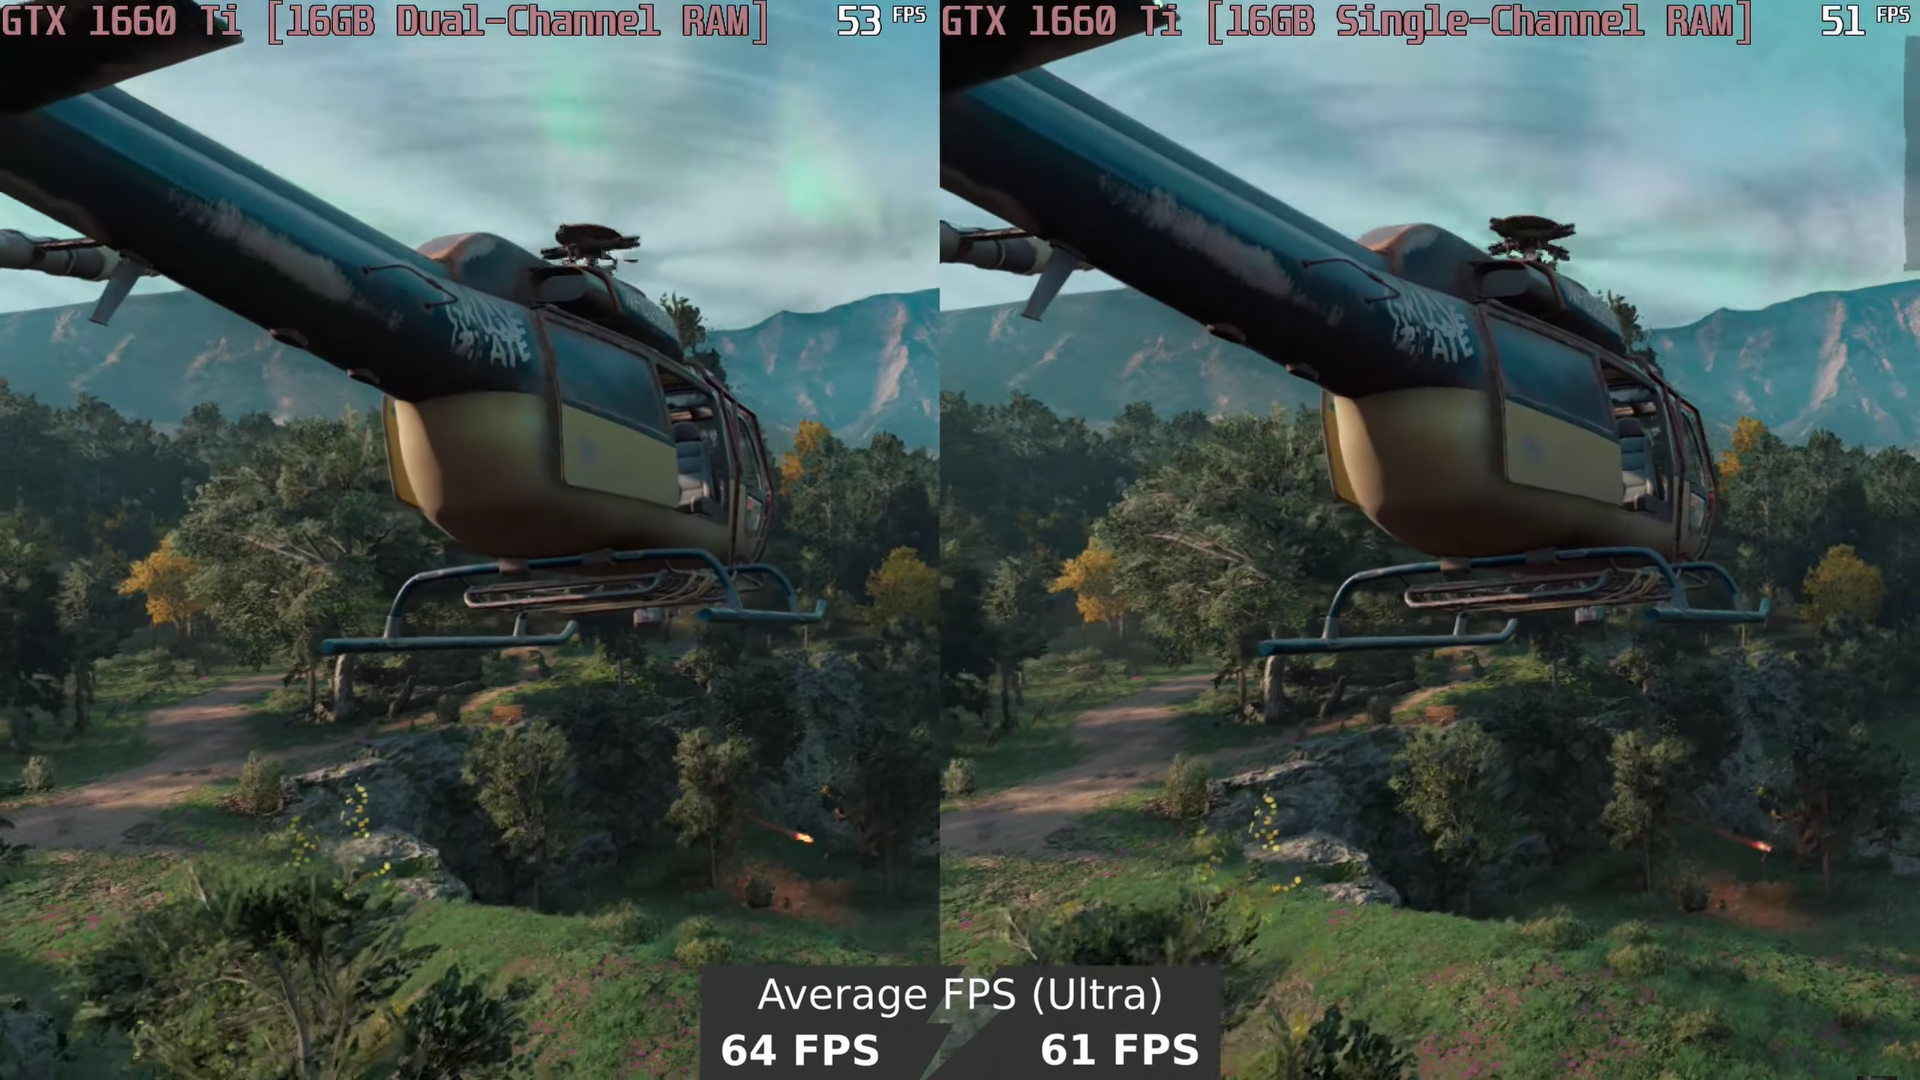 Gaming on Dual-Channel vs Single Channel – what is the FPS difference? |